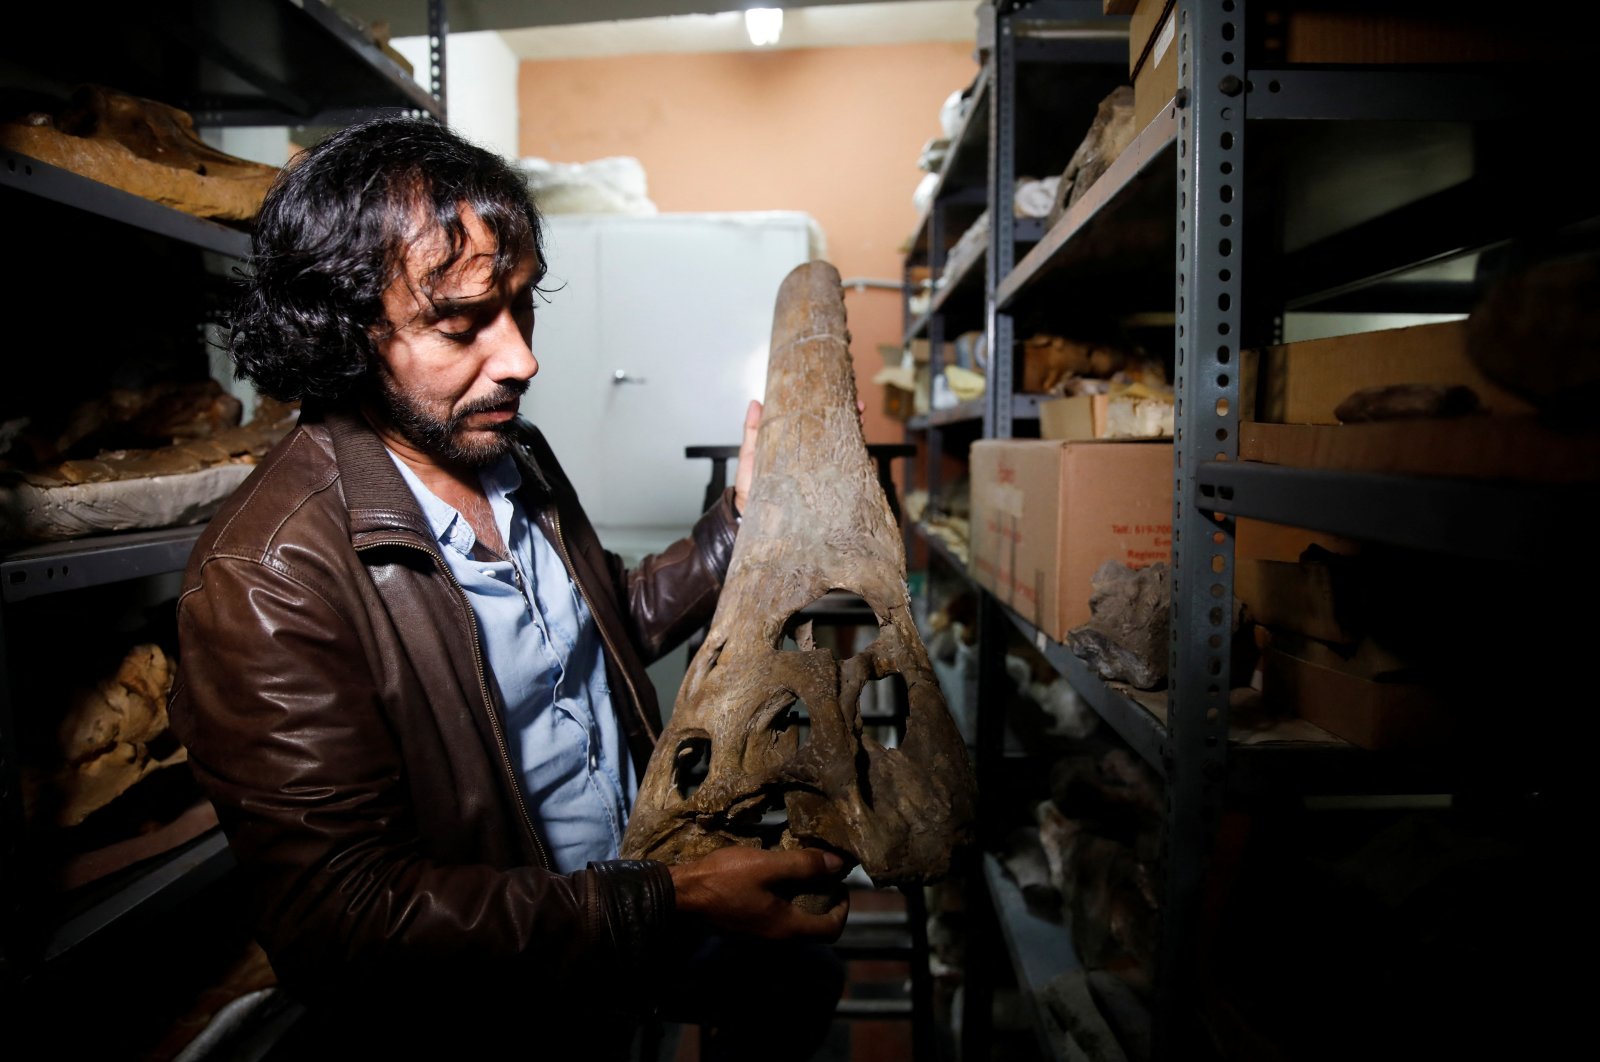 Rodolfo Salas-Gismondi, founder and director of the paleontology department at the Museum of Natural History of the Universidad Nacional Mayor de San Marcos, shows the fossil remains of a crocodile that inhabited the planet 7 million years ago, giving scientists clues about how modern-day crocodiles, who live in freshwater ecosystems, moved from the sea, in Lima, Peru, May 16, 2022. (Reuters Photo)